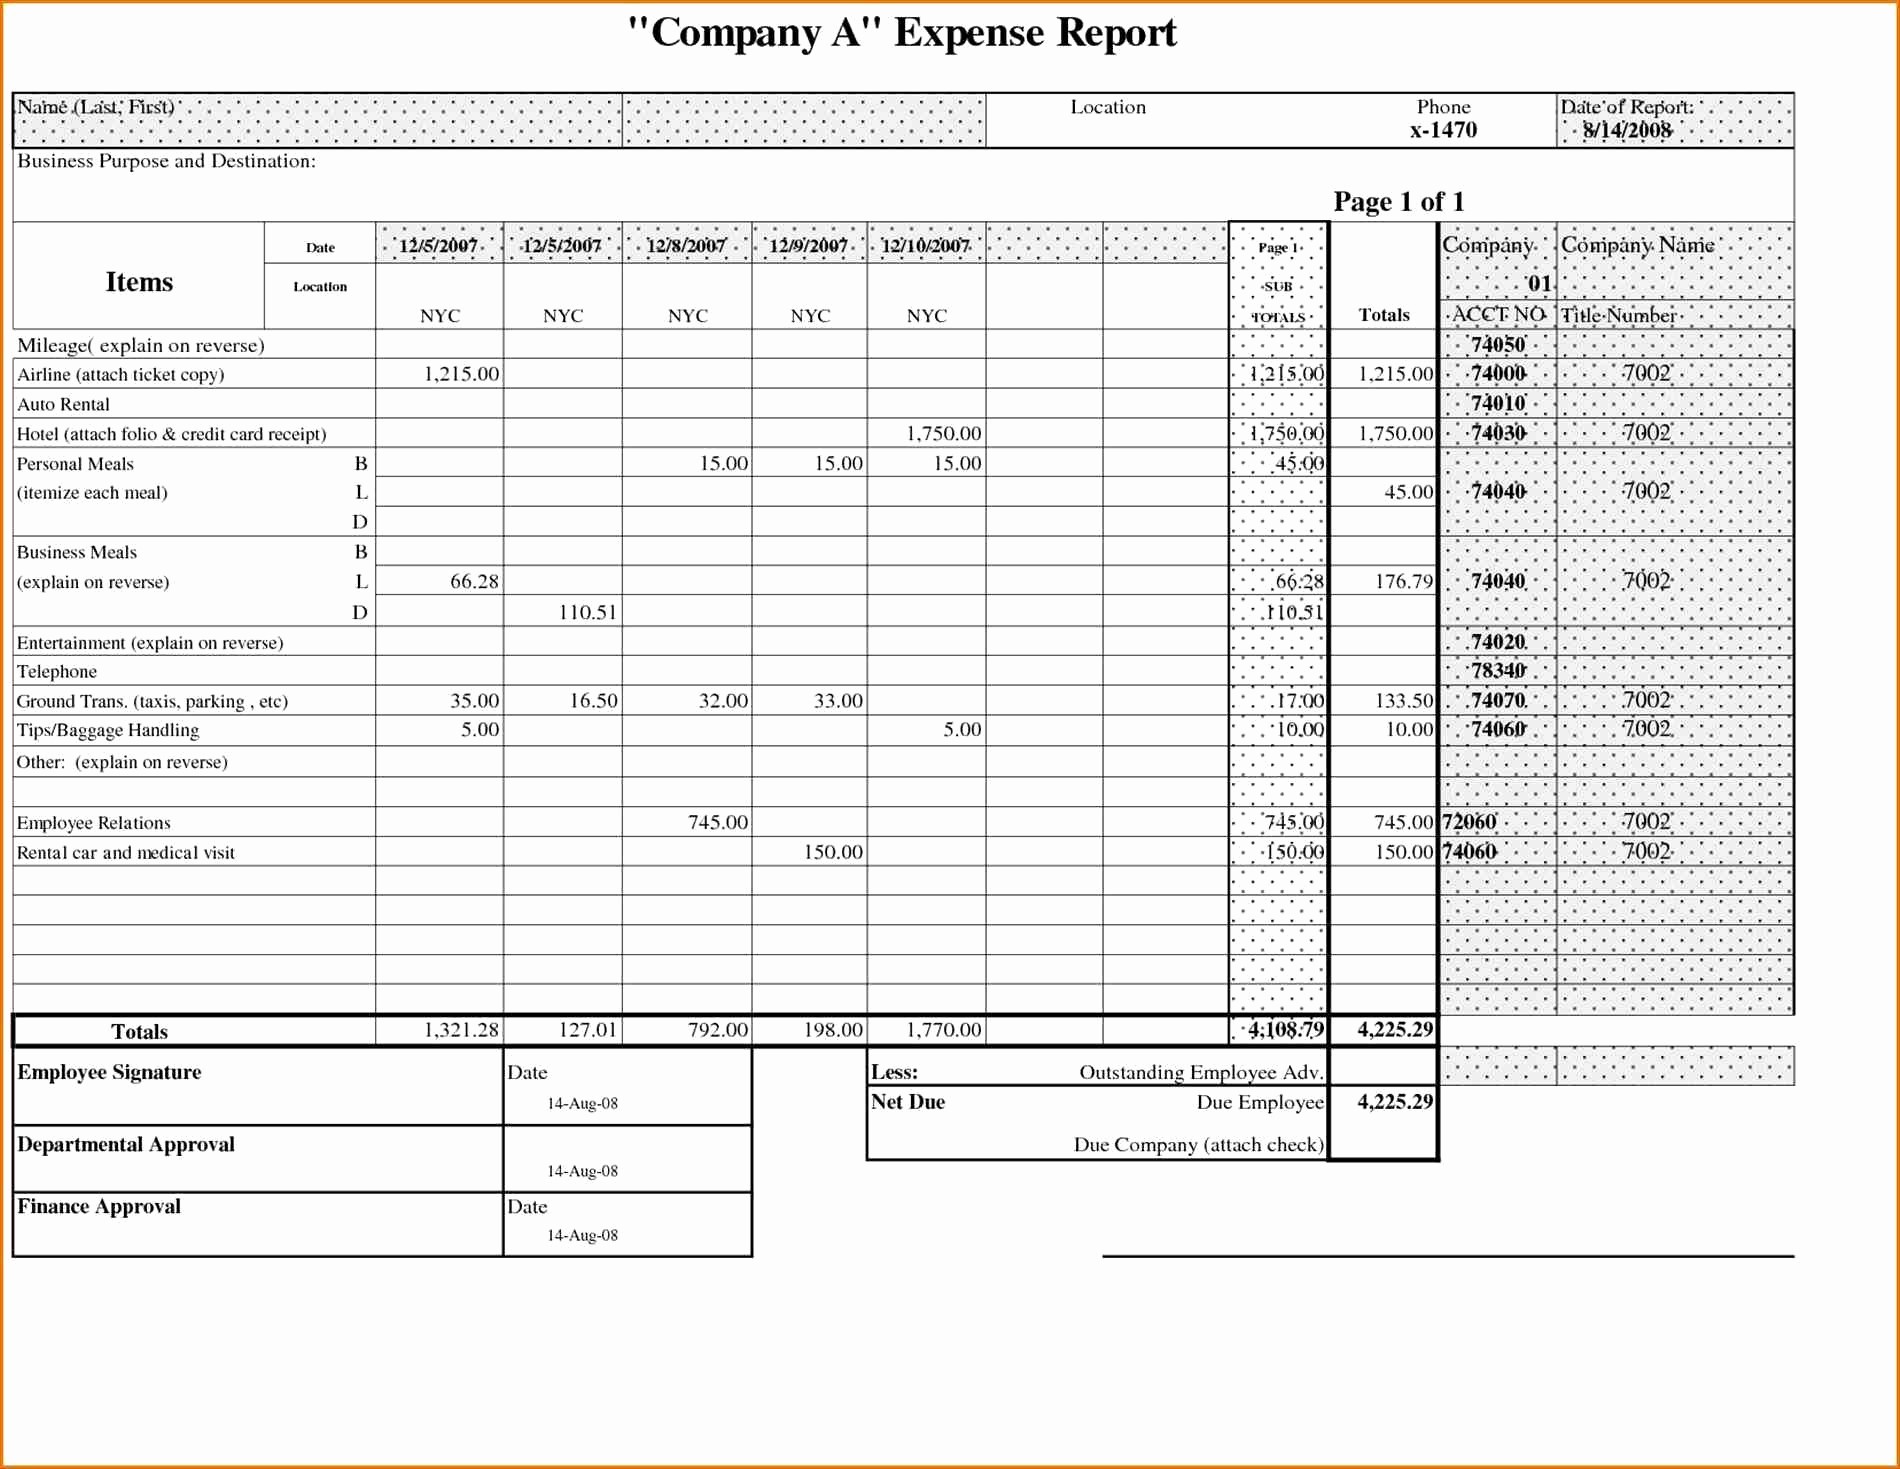 50 Luxury Excel Medical Expense Template DOCUMENTS IDEAS